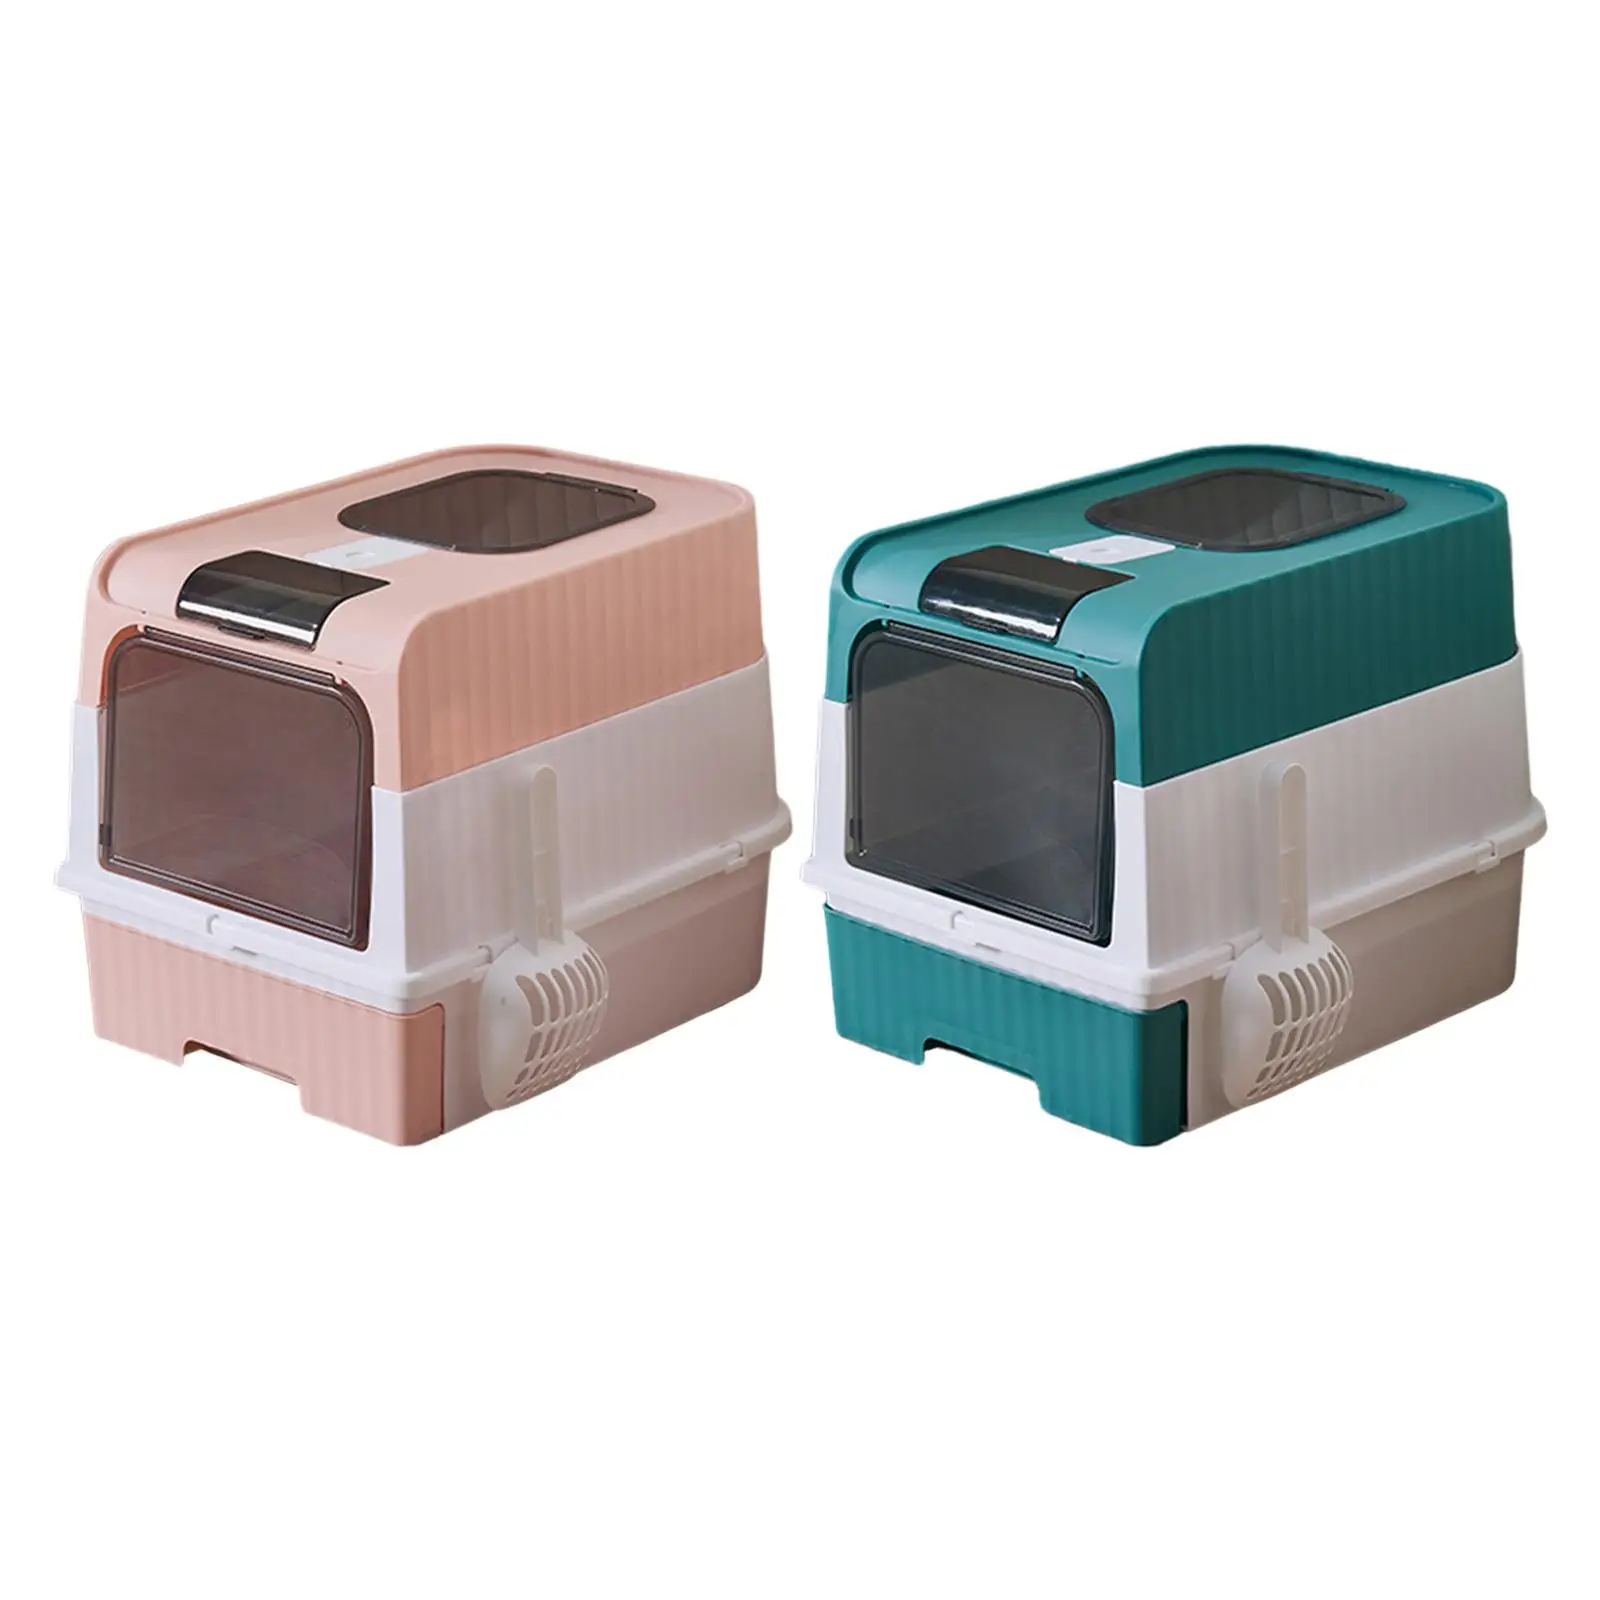 Hooded Cat Litter Boxes with Scoop Portable Removable Easy to Clean Large Enough Kitten Potty for Small, Medium and Large Cat